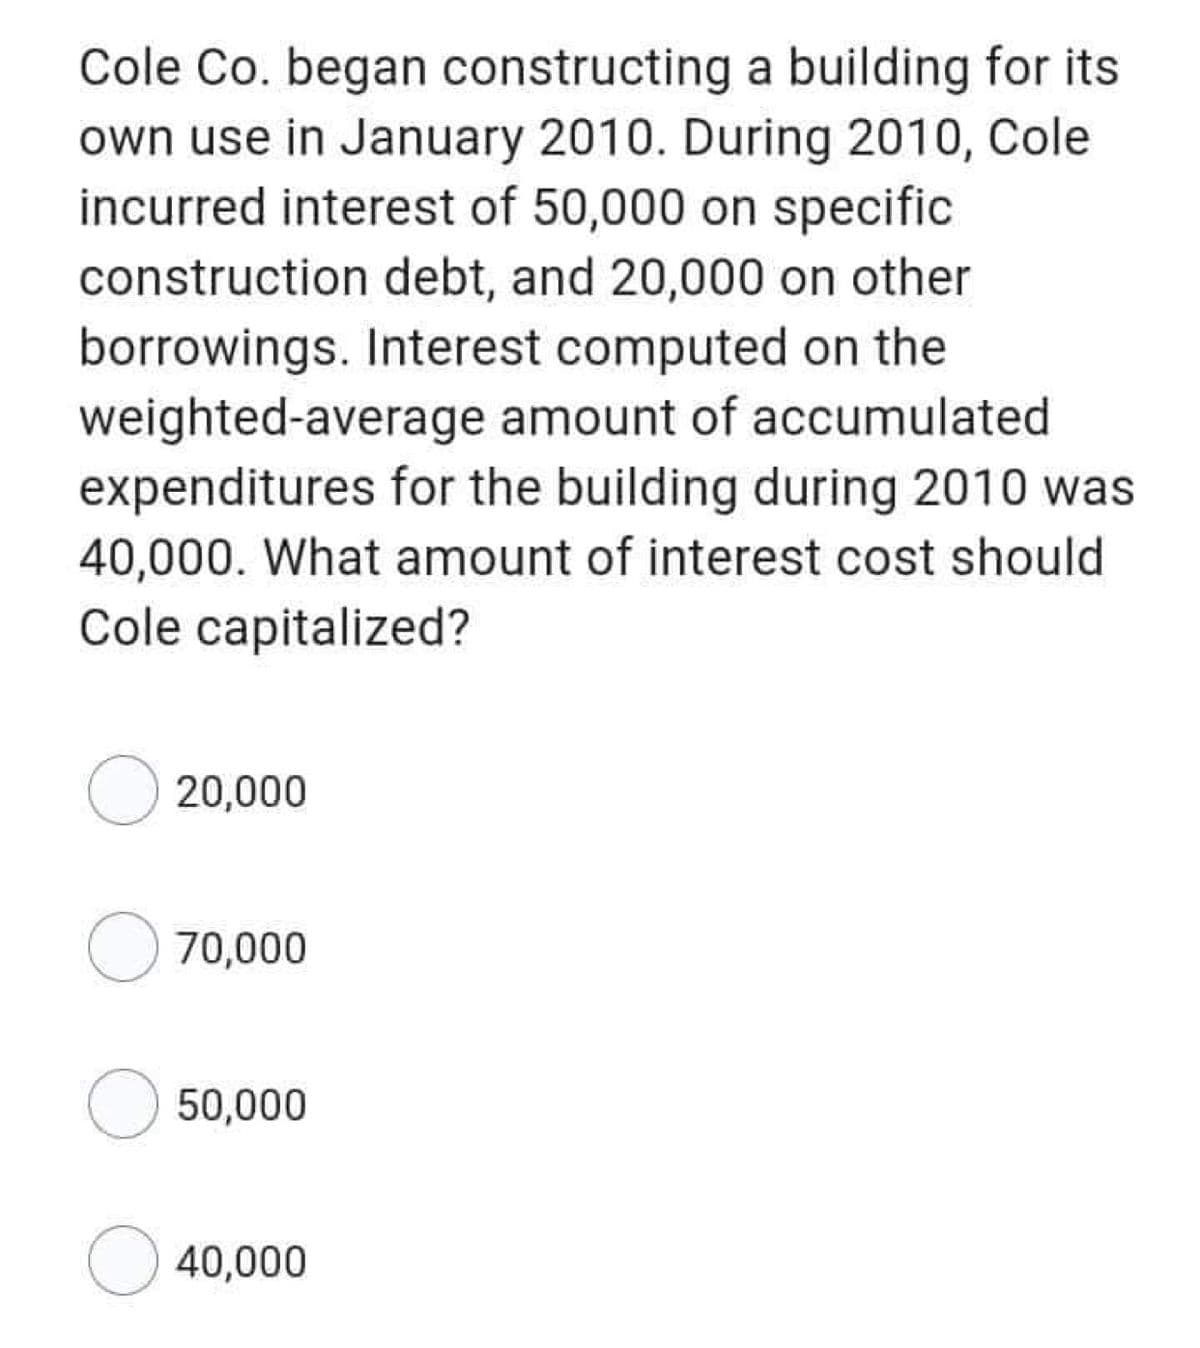 Cole Co. began constructing a building for its
own use in January 2010. During 2010, Cole
incurred interest of 50,000 on specific
construction debt, and 20,000 on other
borrowings. Interest computed on the
weighted-average amount of accumulated
expenditures for the building during 2010 was
40,000. What amount of interest cost should
Cole capitalized?
O 20,000
70,000
O 50,000
O 40,000